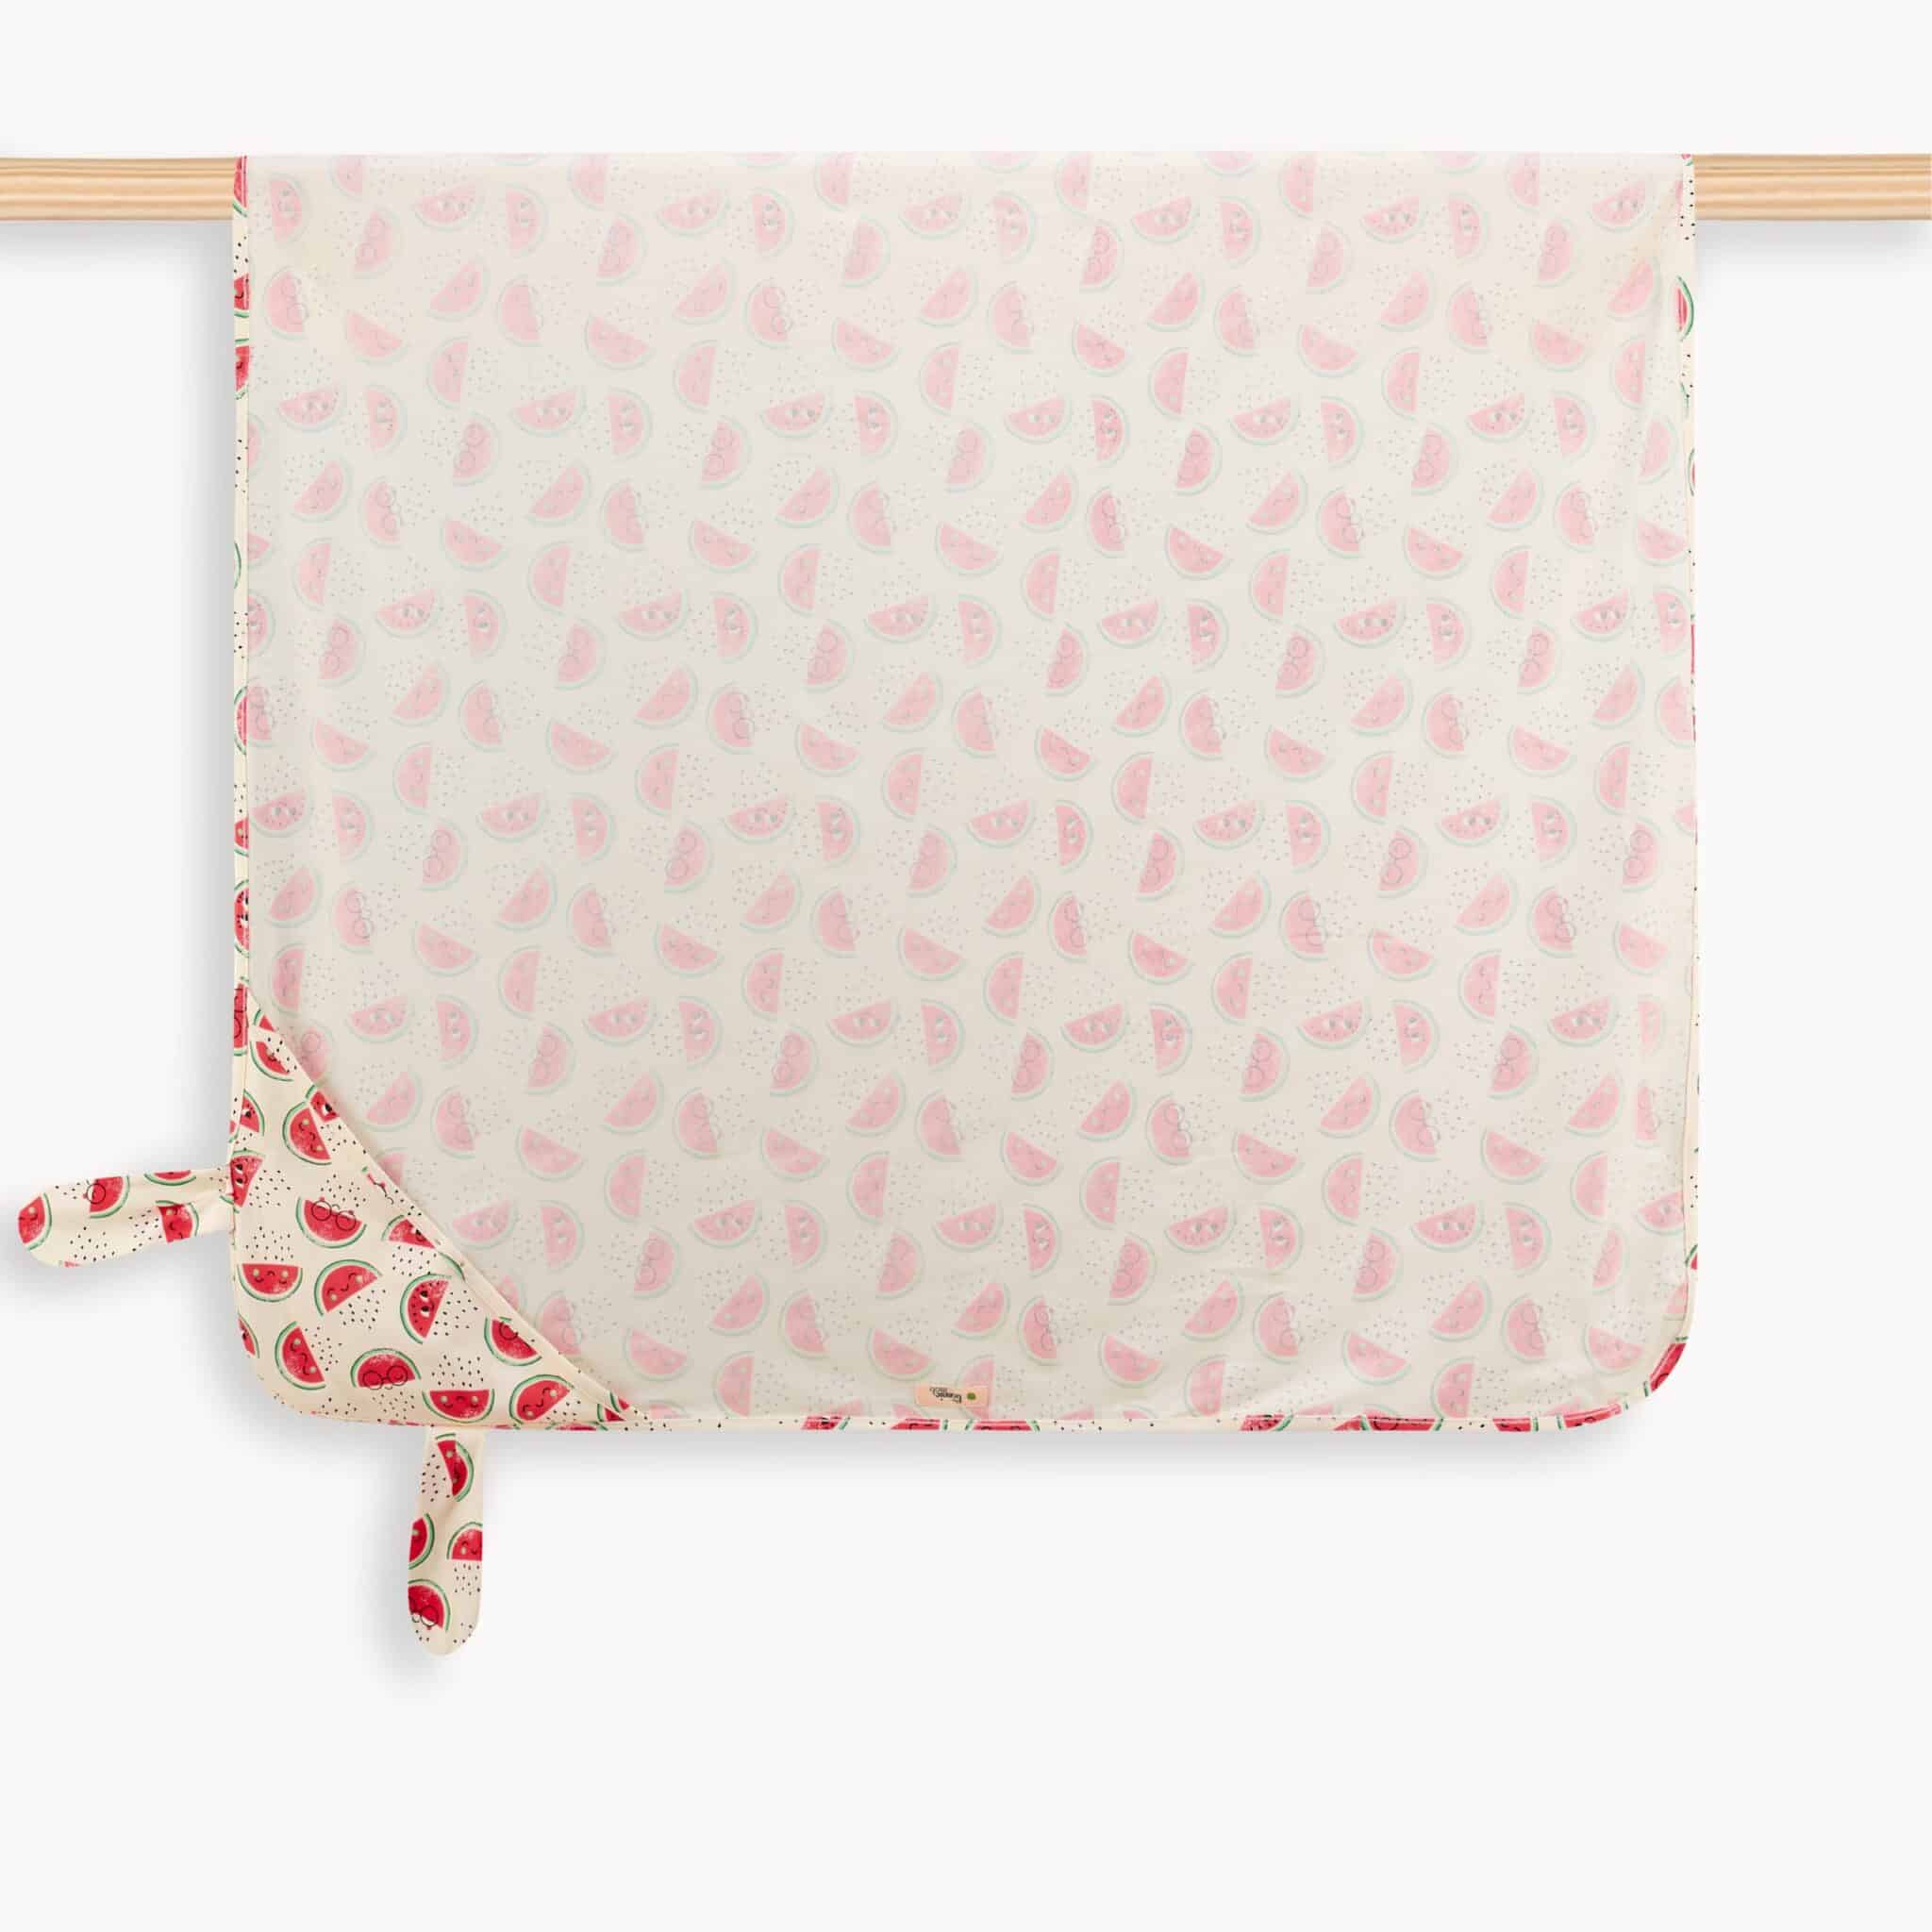 The Bonnie Mob watermelon baby blanket with hood